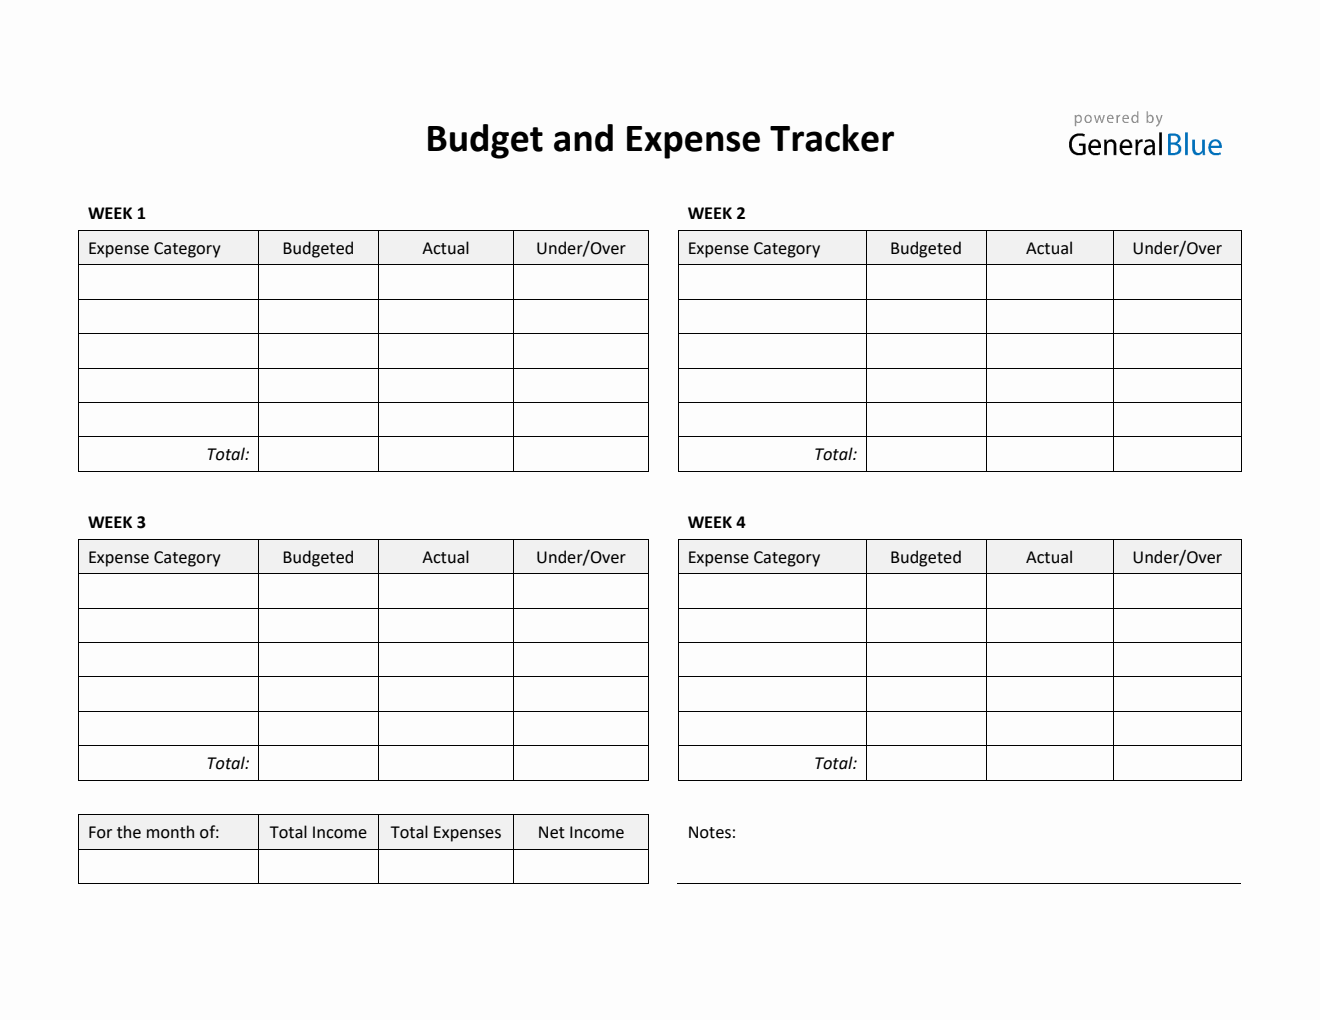 Budget and Expense Tracker in PDF (Printable)